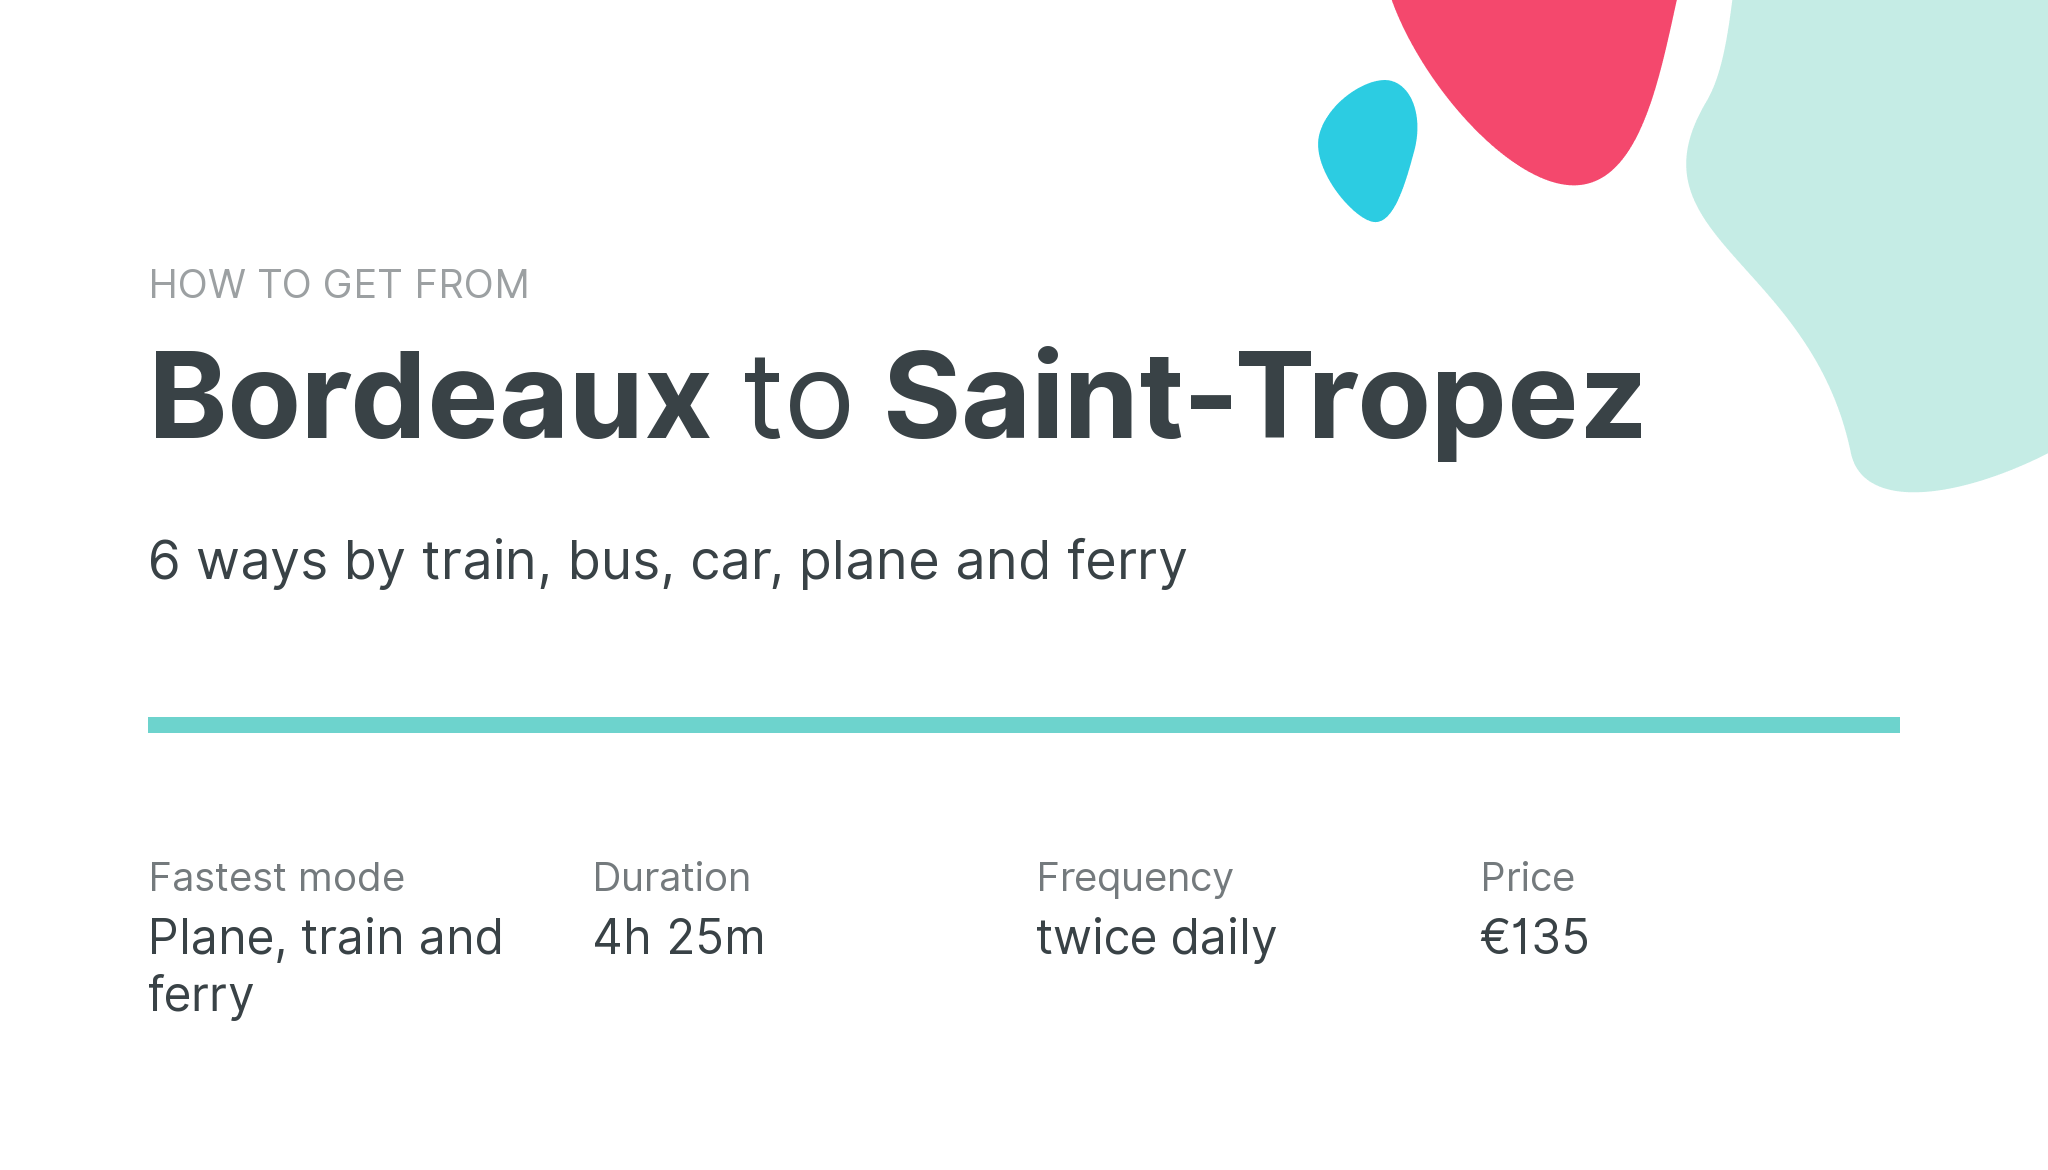 How do I get from Bordeaux to Saint-Tropez